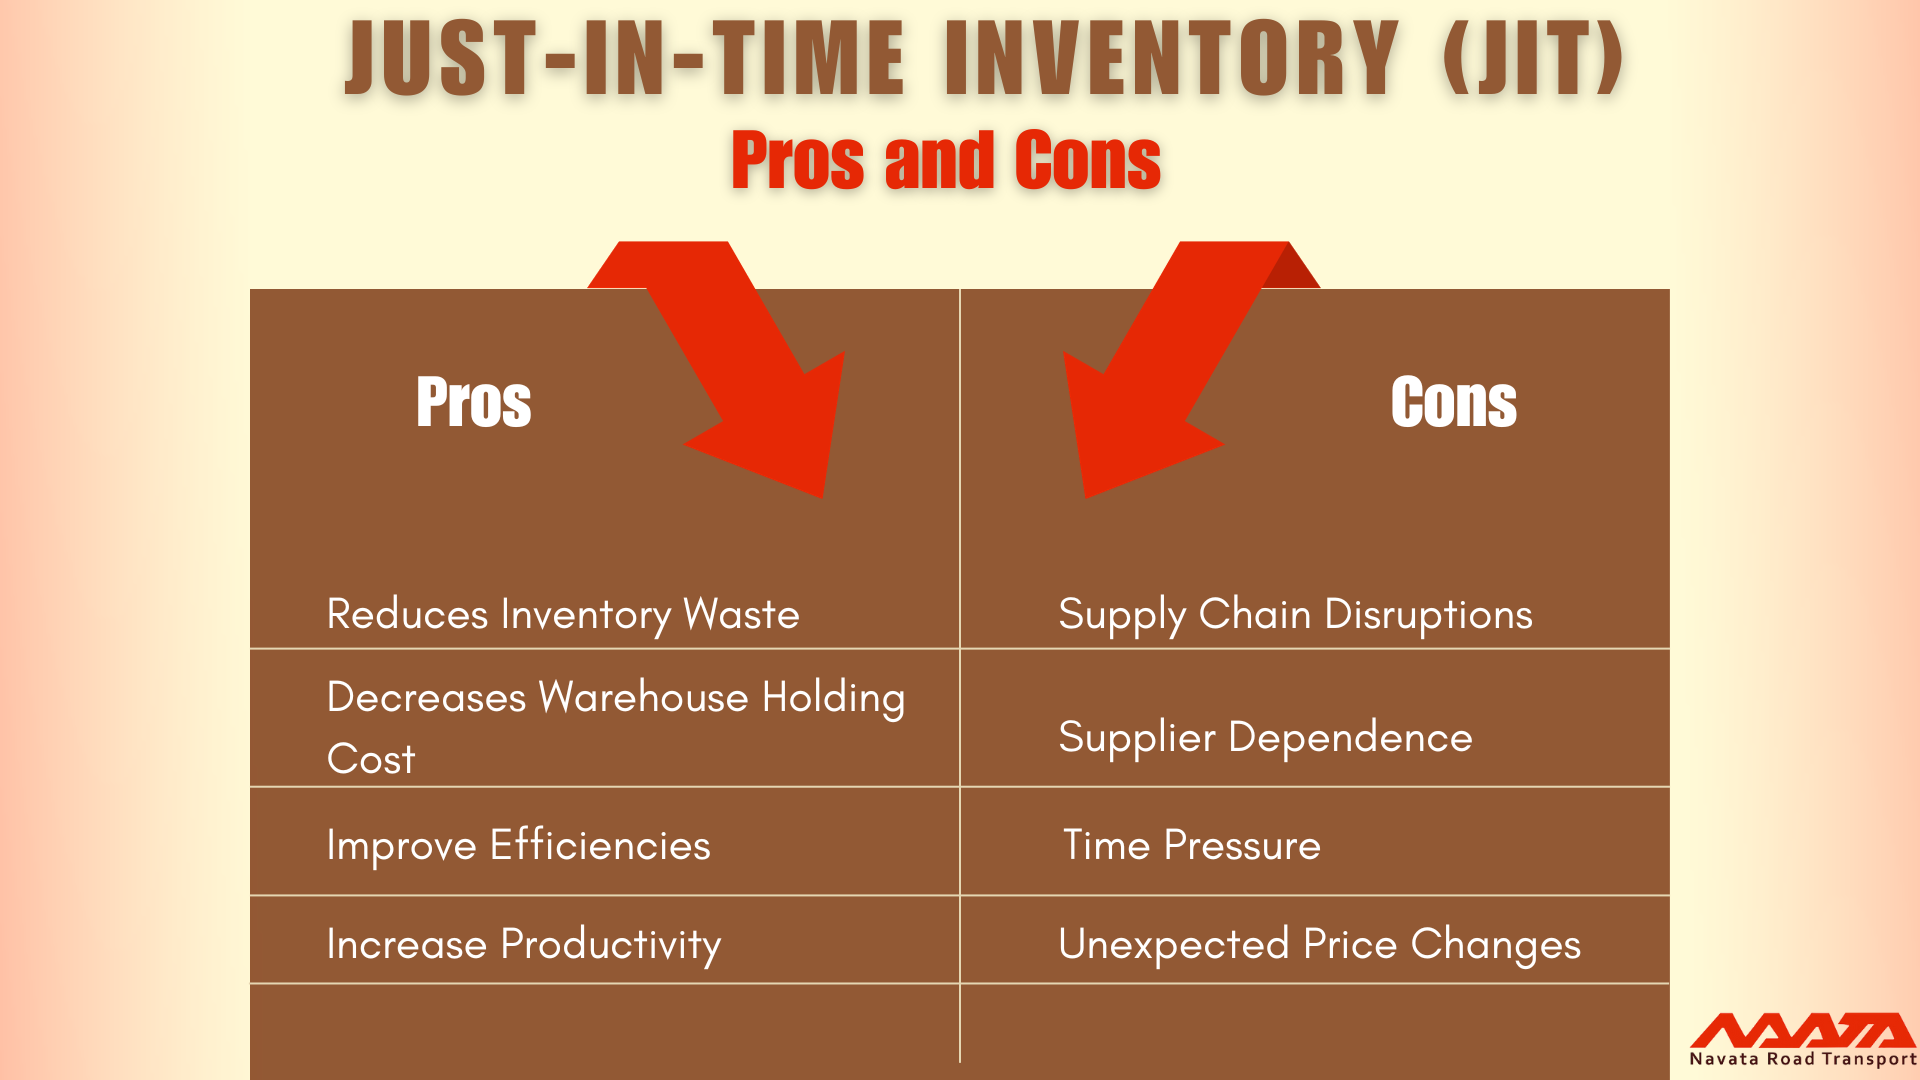 Pros & Cons of Just-In-Time